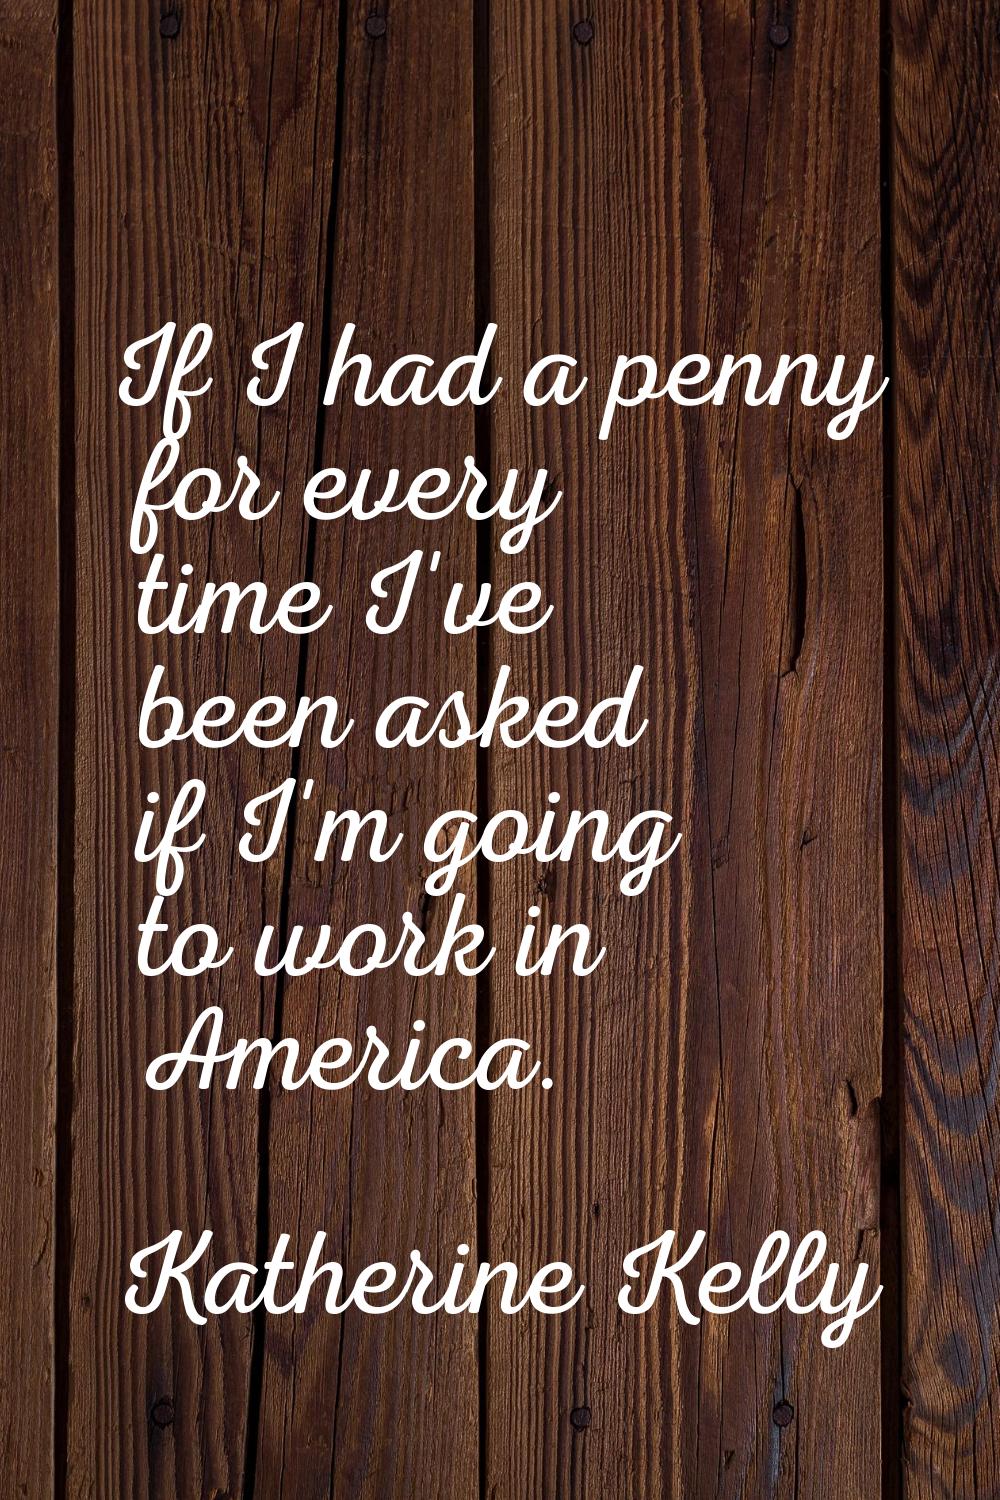 If I had a penny for every time I've been asked if I'm going to work in America.